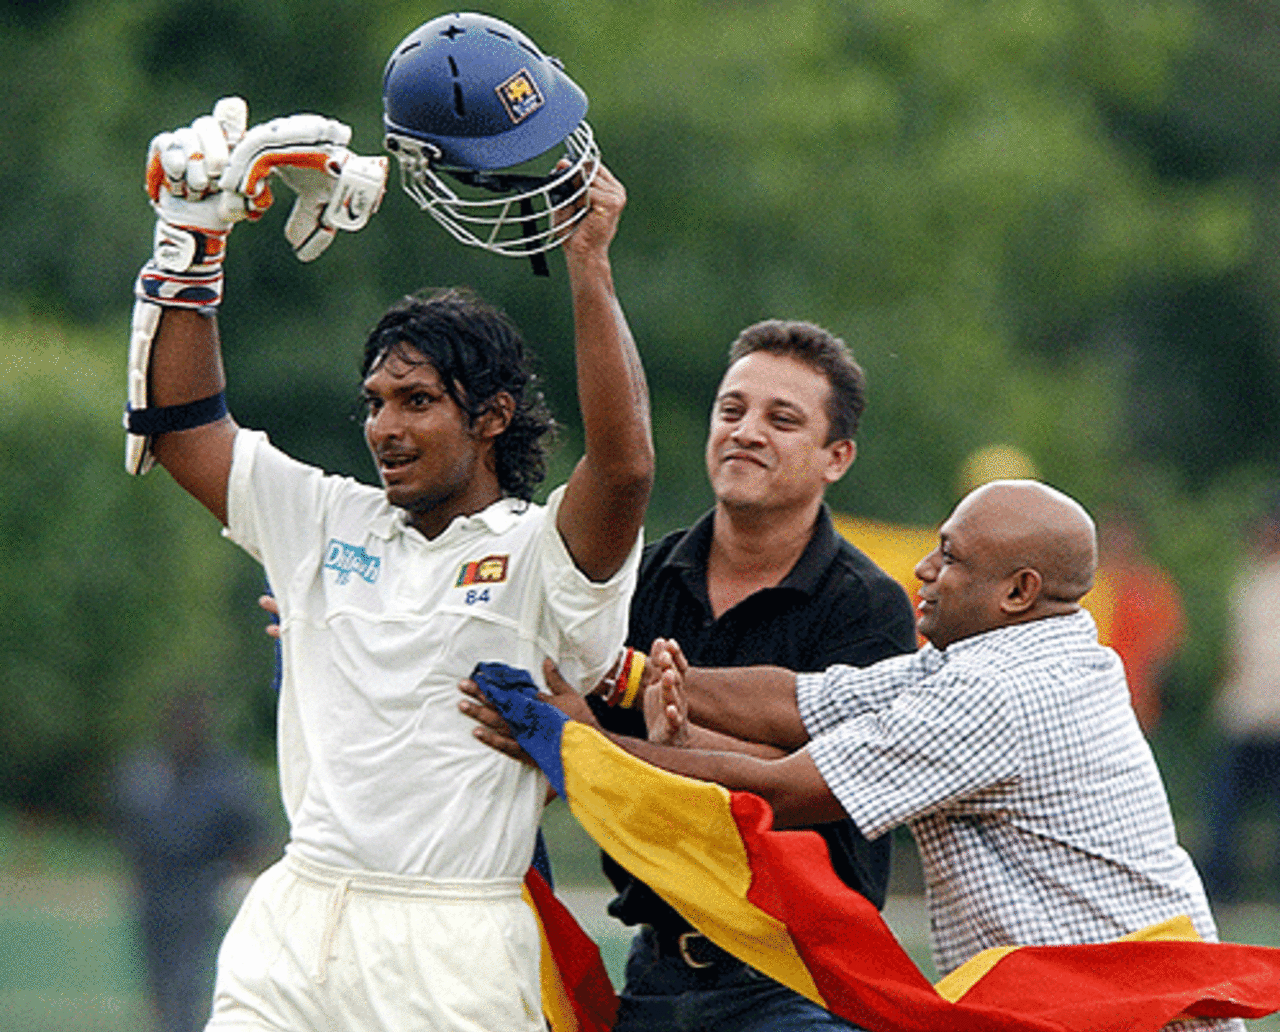 Kumar Sangakkara (L) acknowledges the crowd after completing 100 runs during the third day's play of the second and final Test match between Sri Lanka and the West Indies at the Asgiriya cricket grounds in Kandy, 24 July 2005